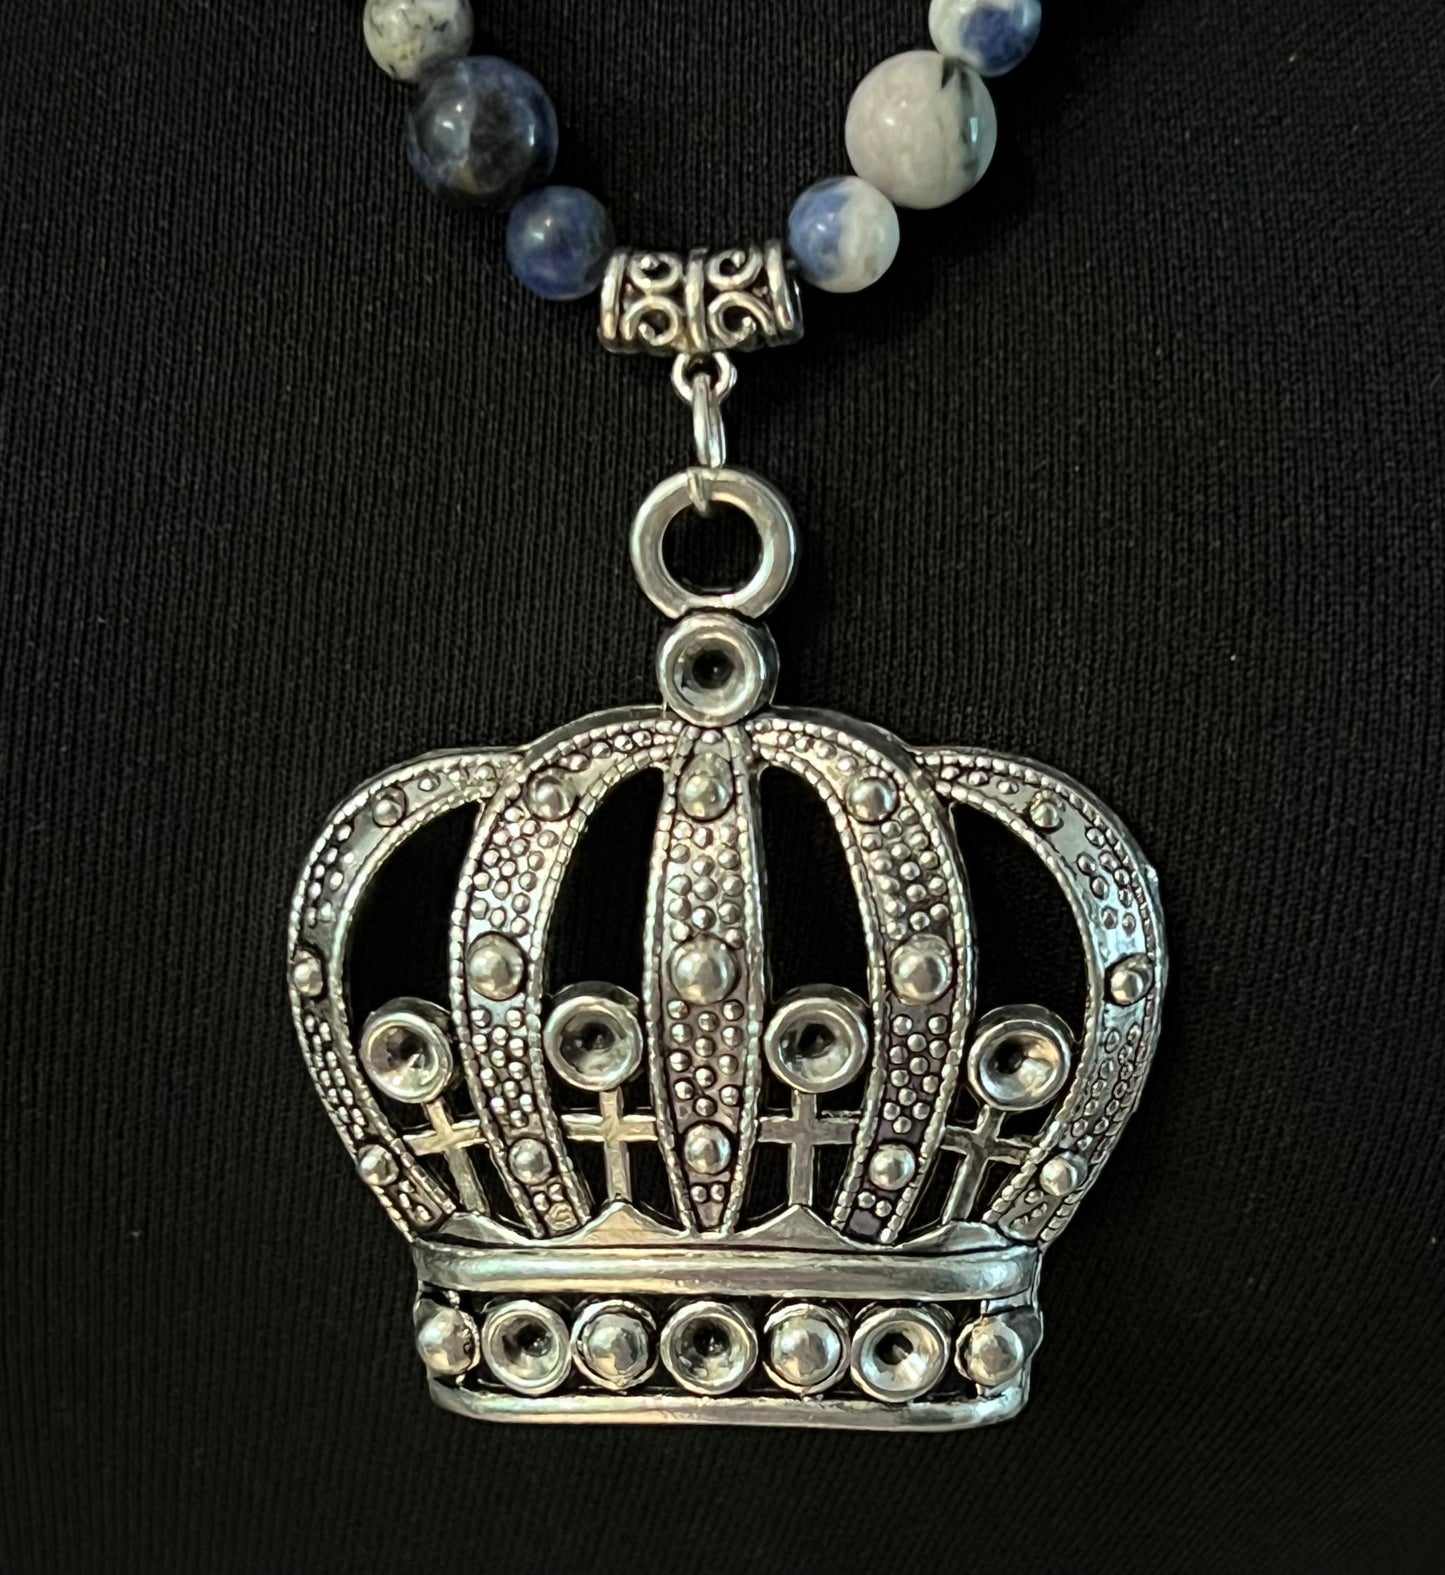 Necklace with Large Crown Pendant and Blue Sodalite Beads